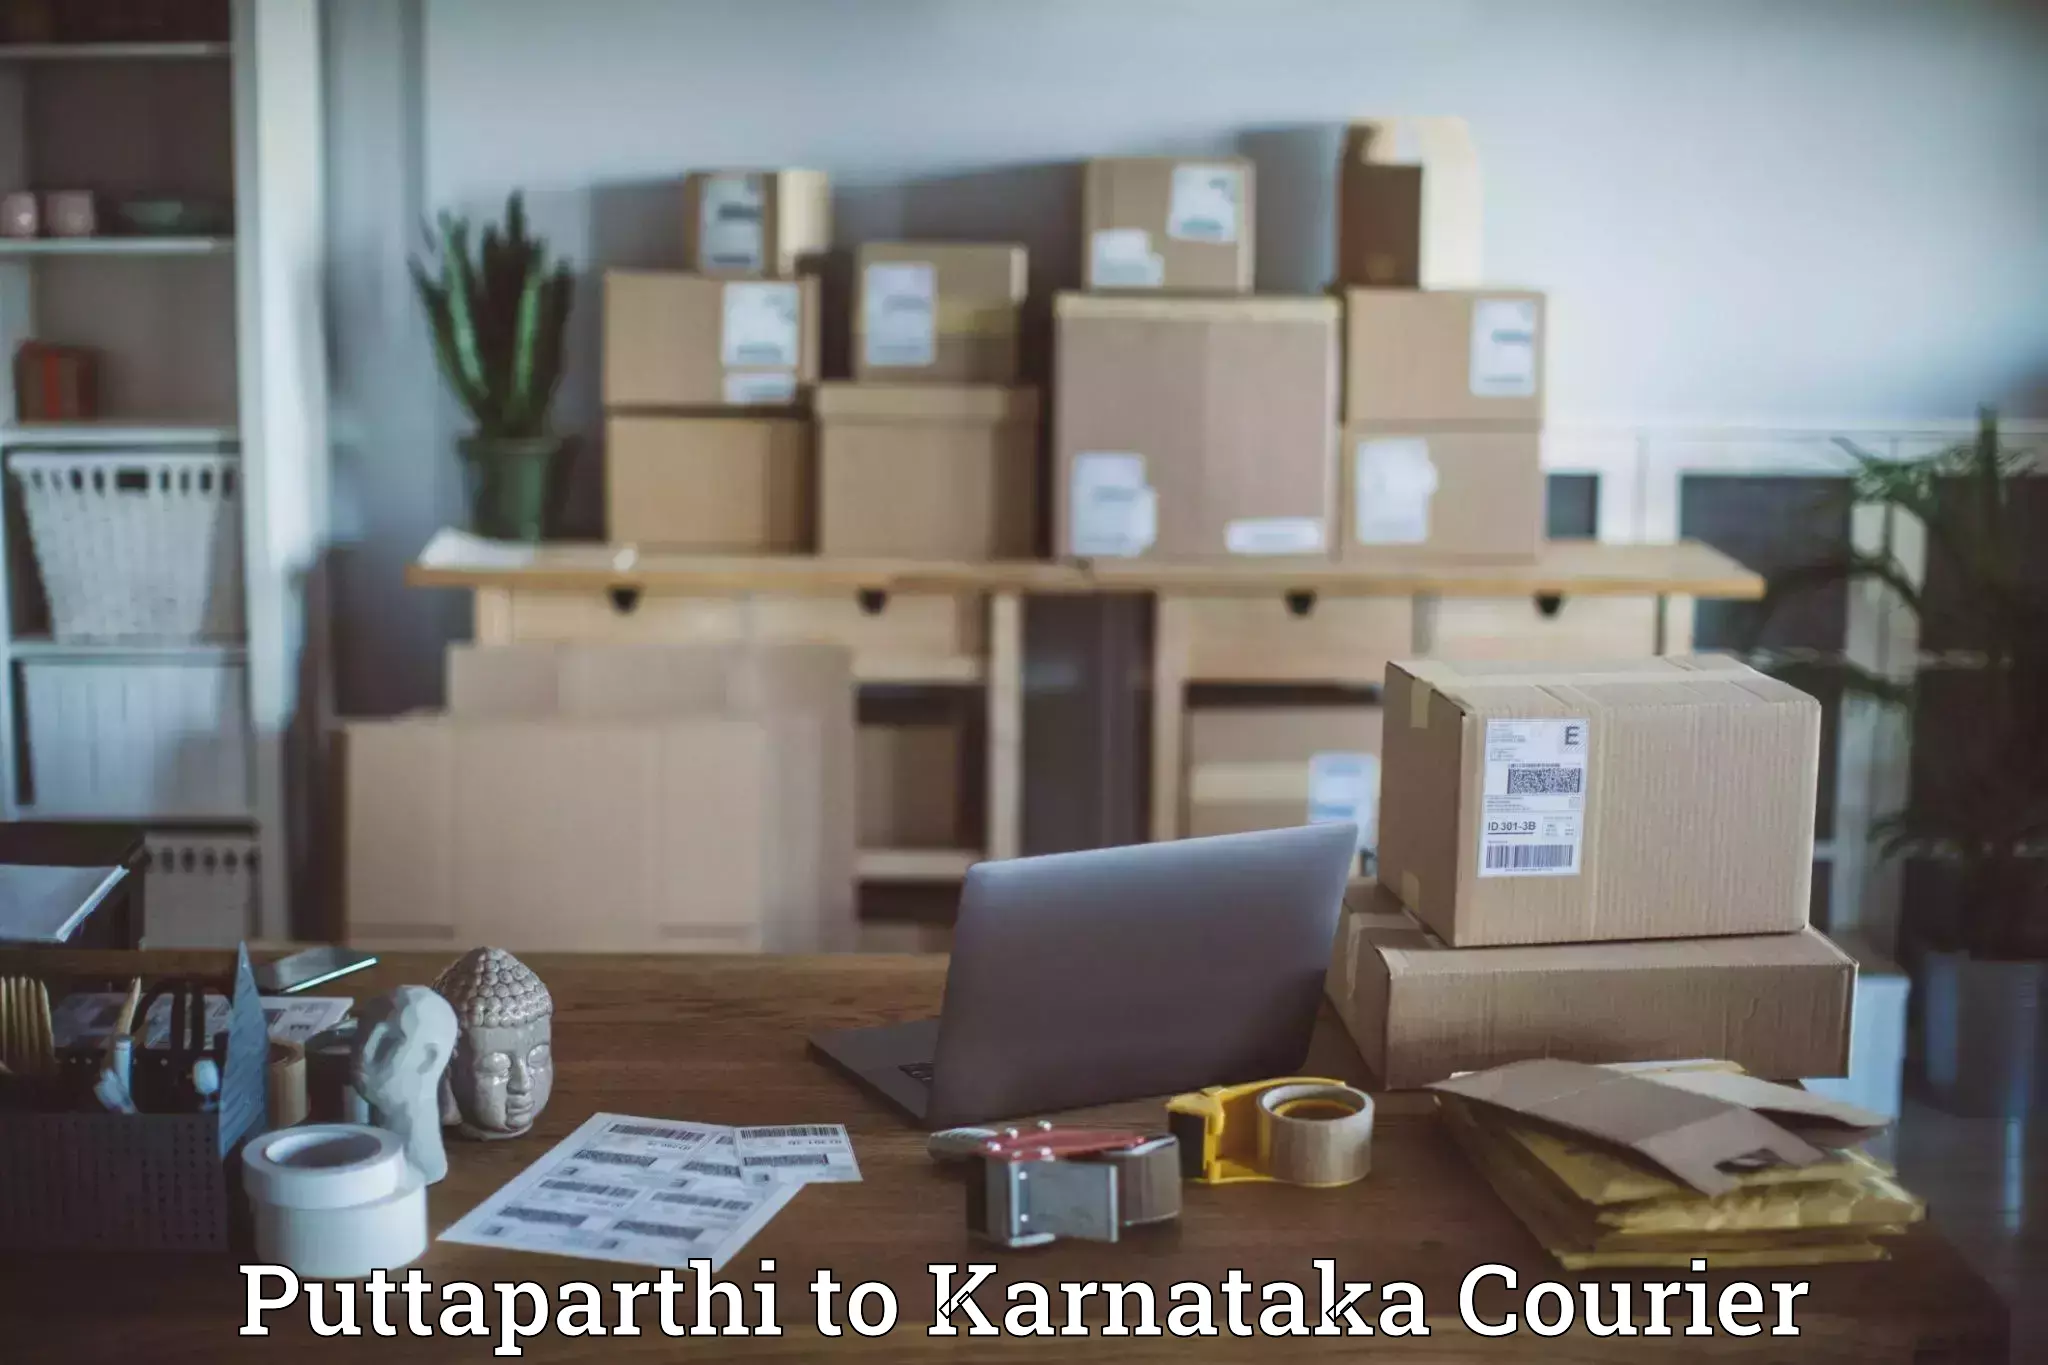 High-capacity parcel service Puttaparthi to Manipal Academy of Higher Education